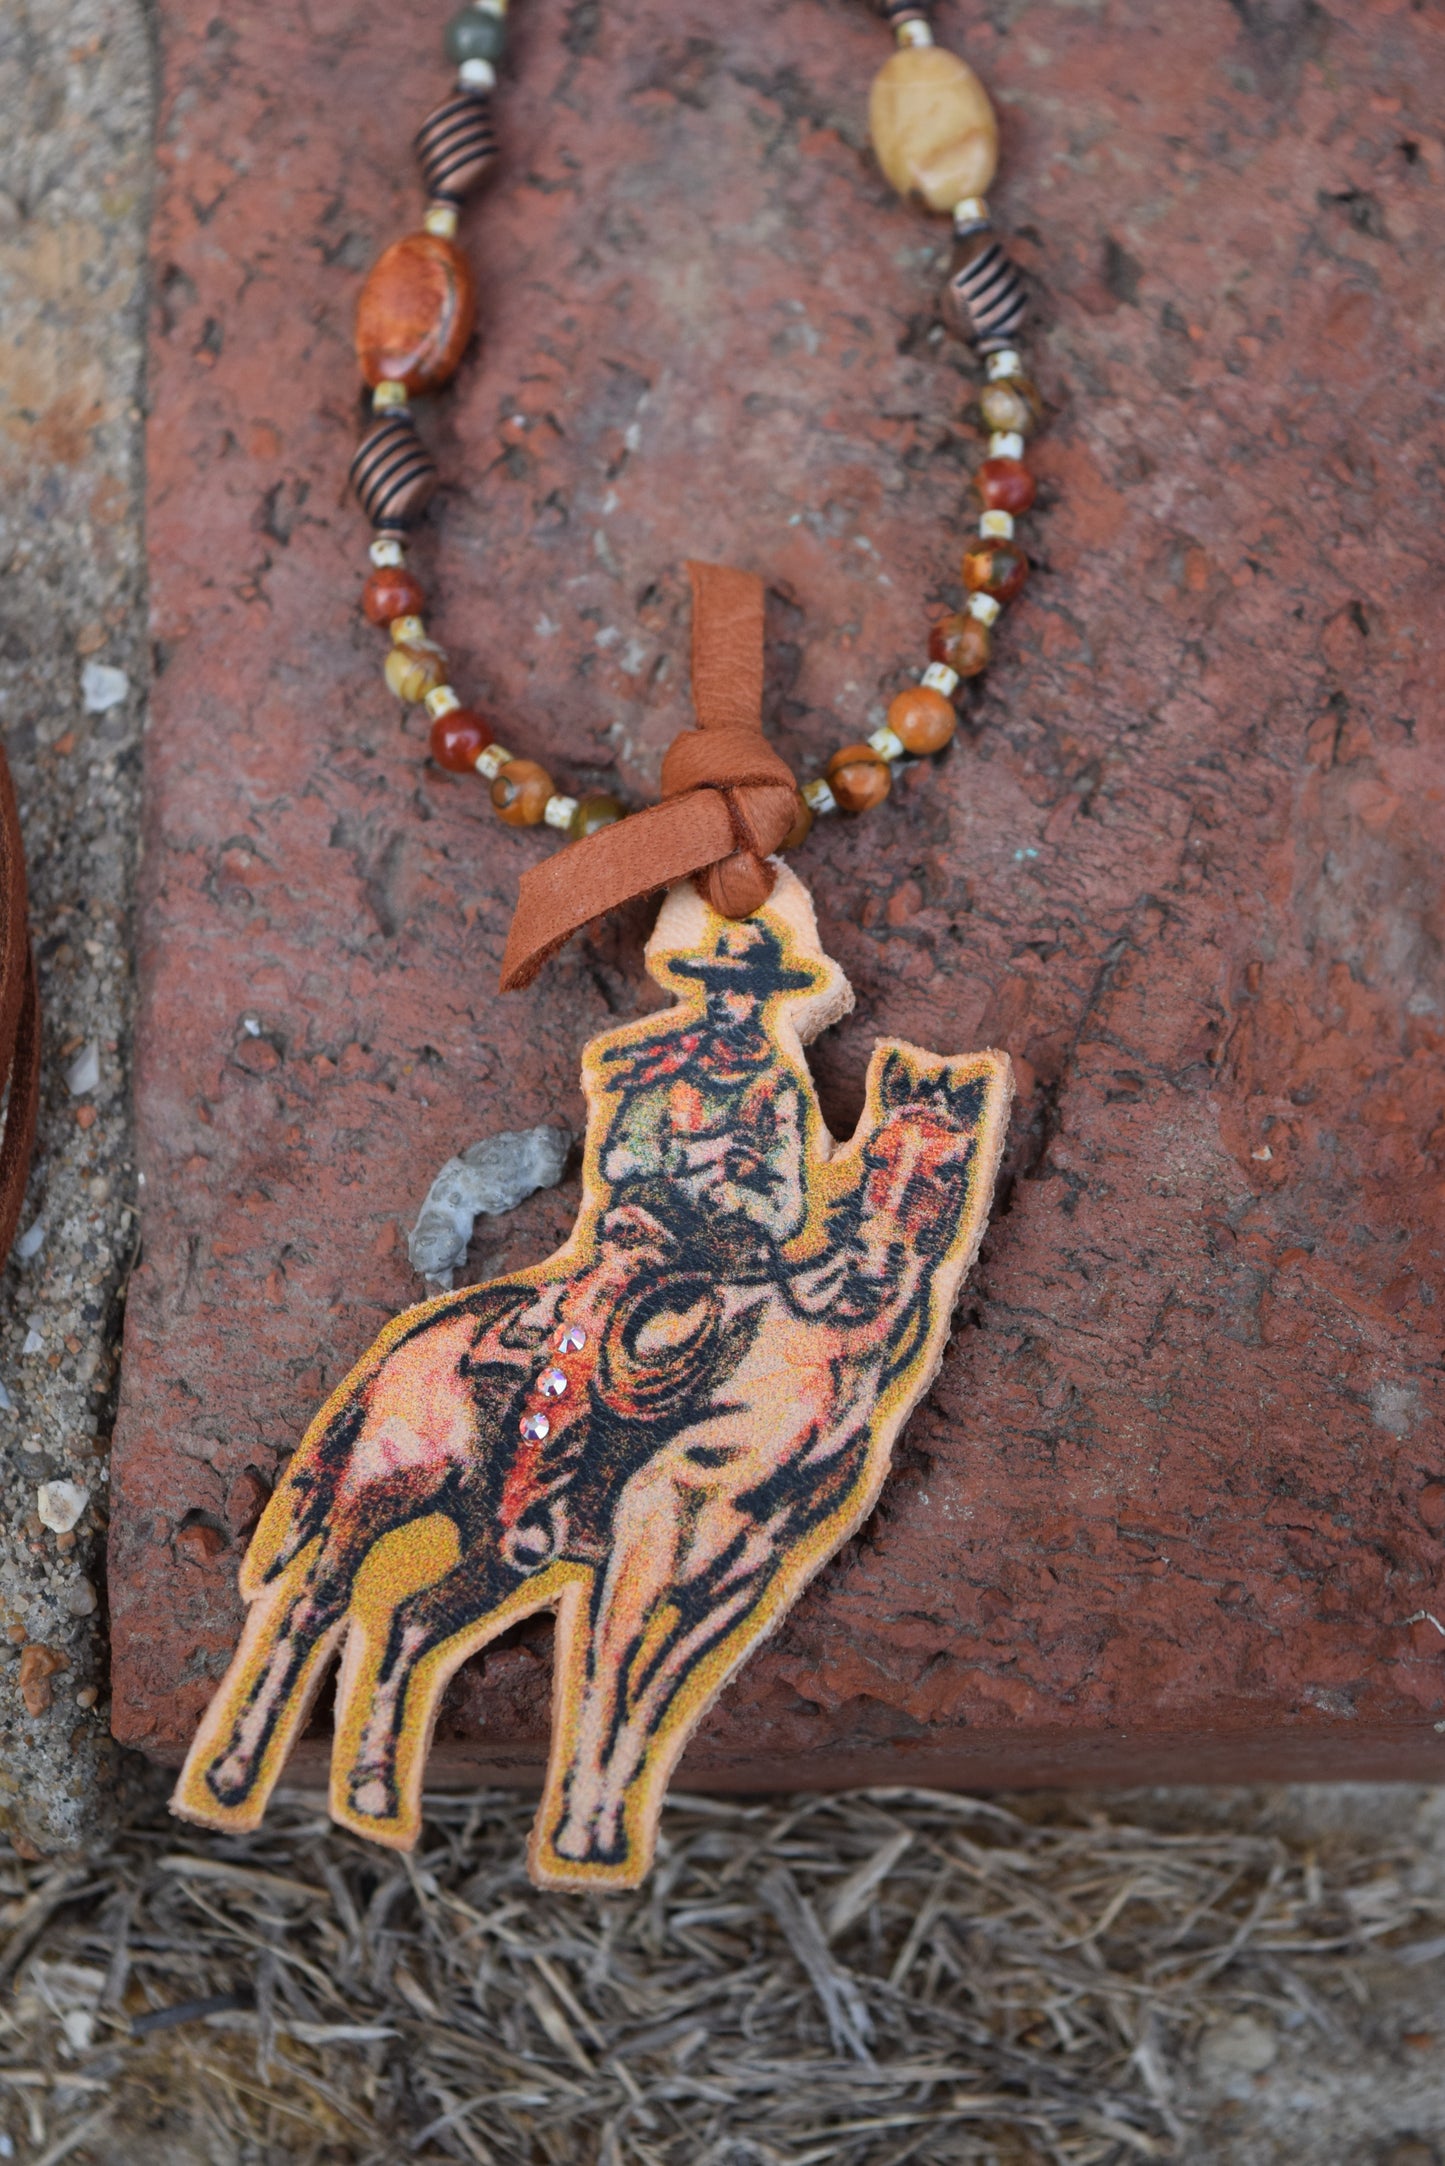 The Cowpuncher Necklace